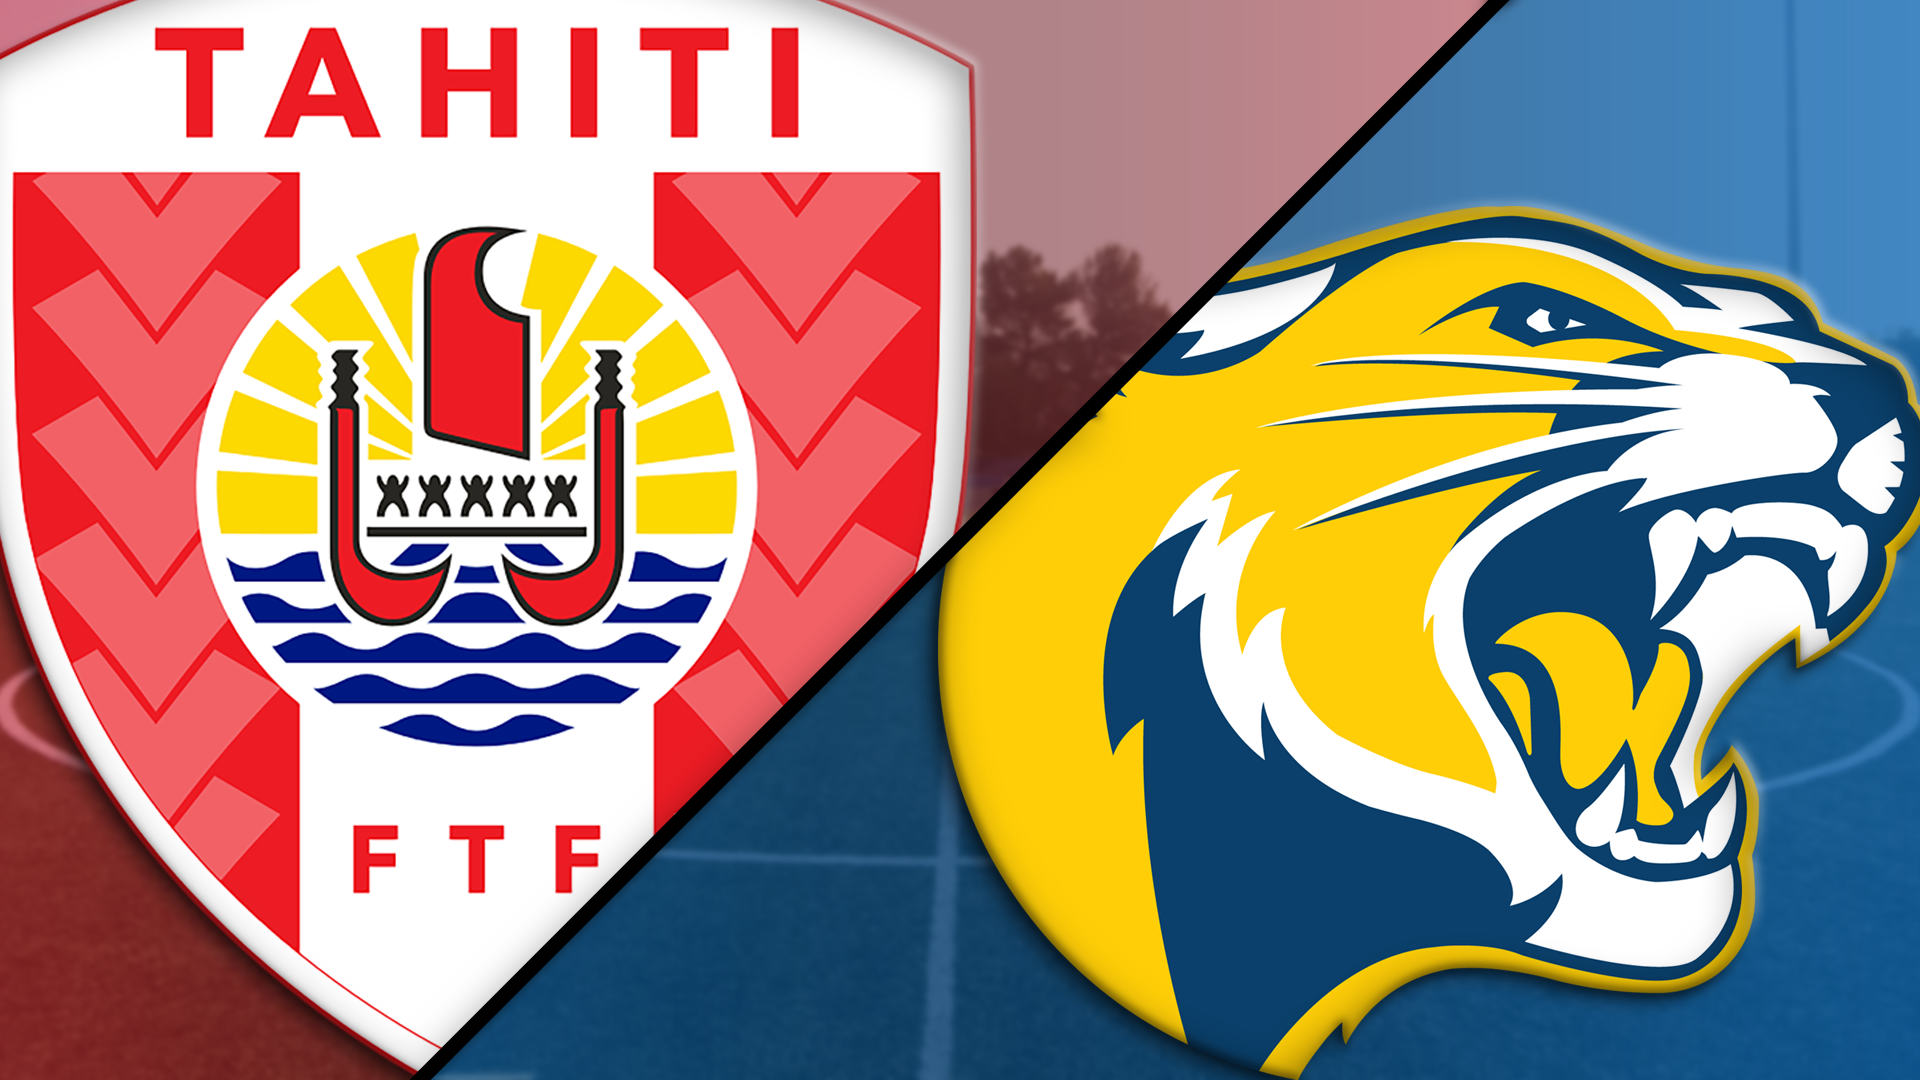 College of the Canyons men's soccer vs. Tahiti U20 National Team promotional graphic.